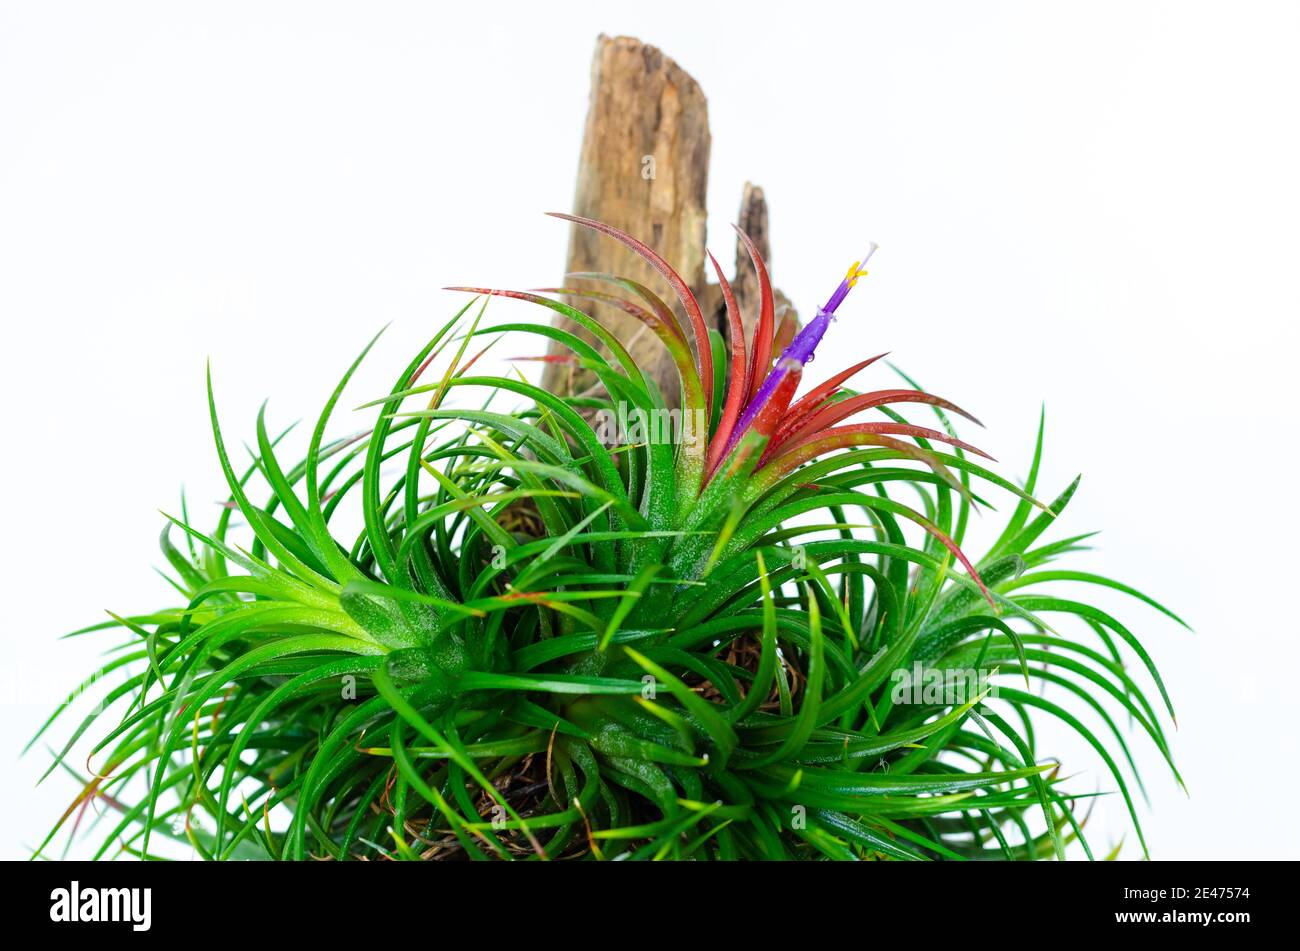 Air plant - Tillandsia with its flower on white background. Stock Photo